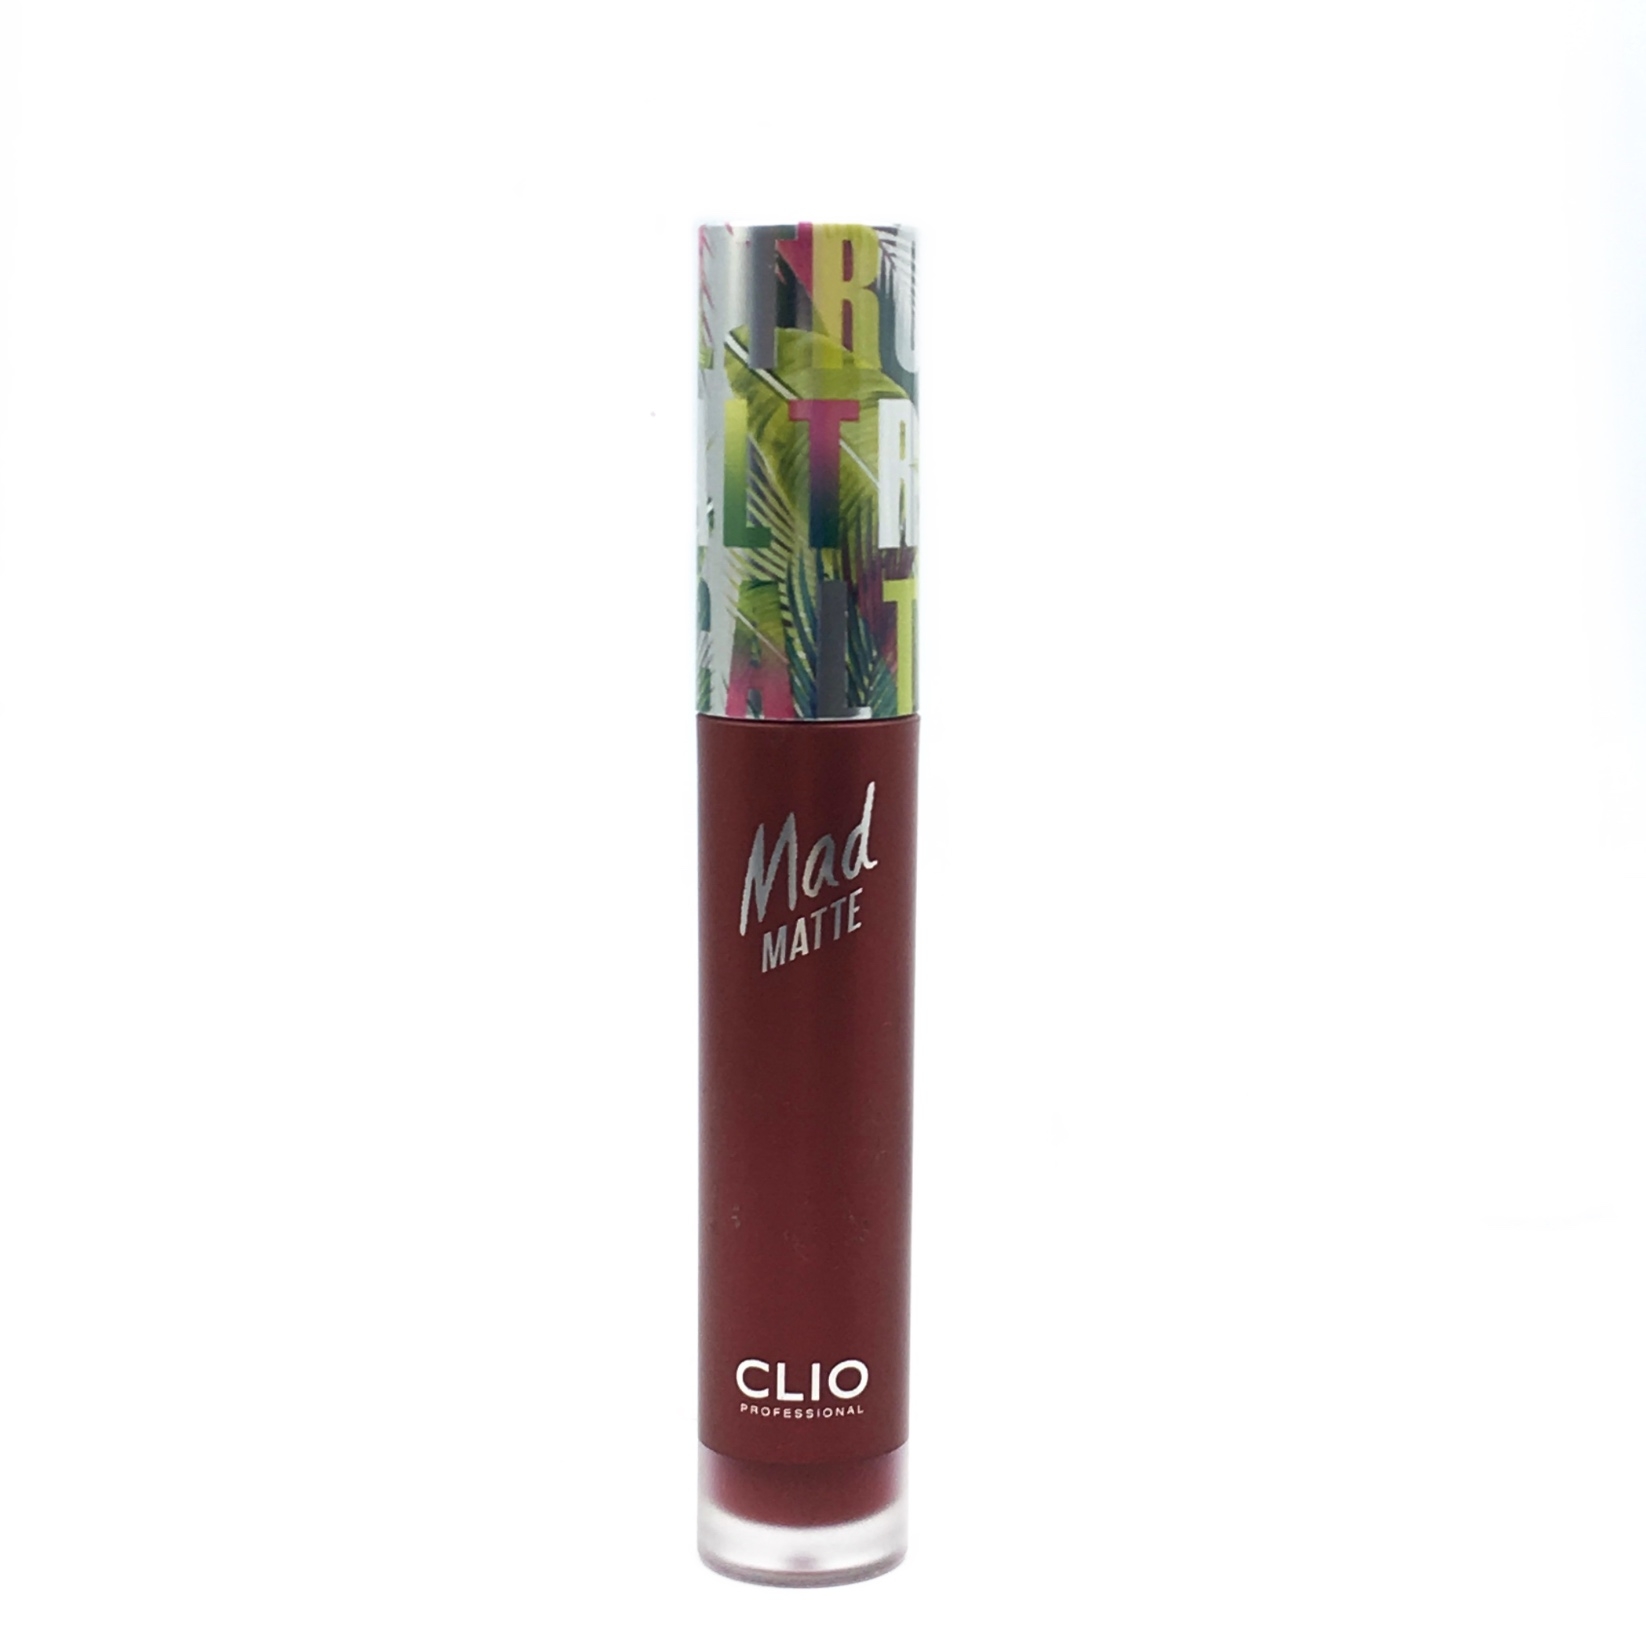 Clio Berryboost Tropical Mad Matte Lips